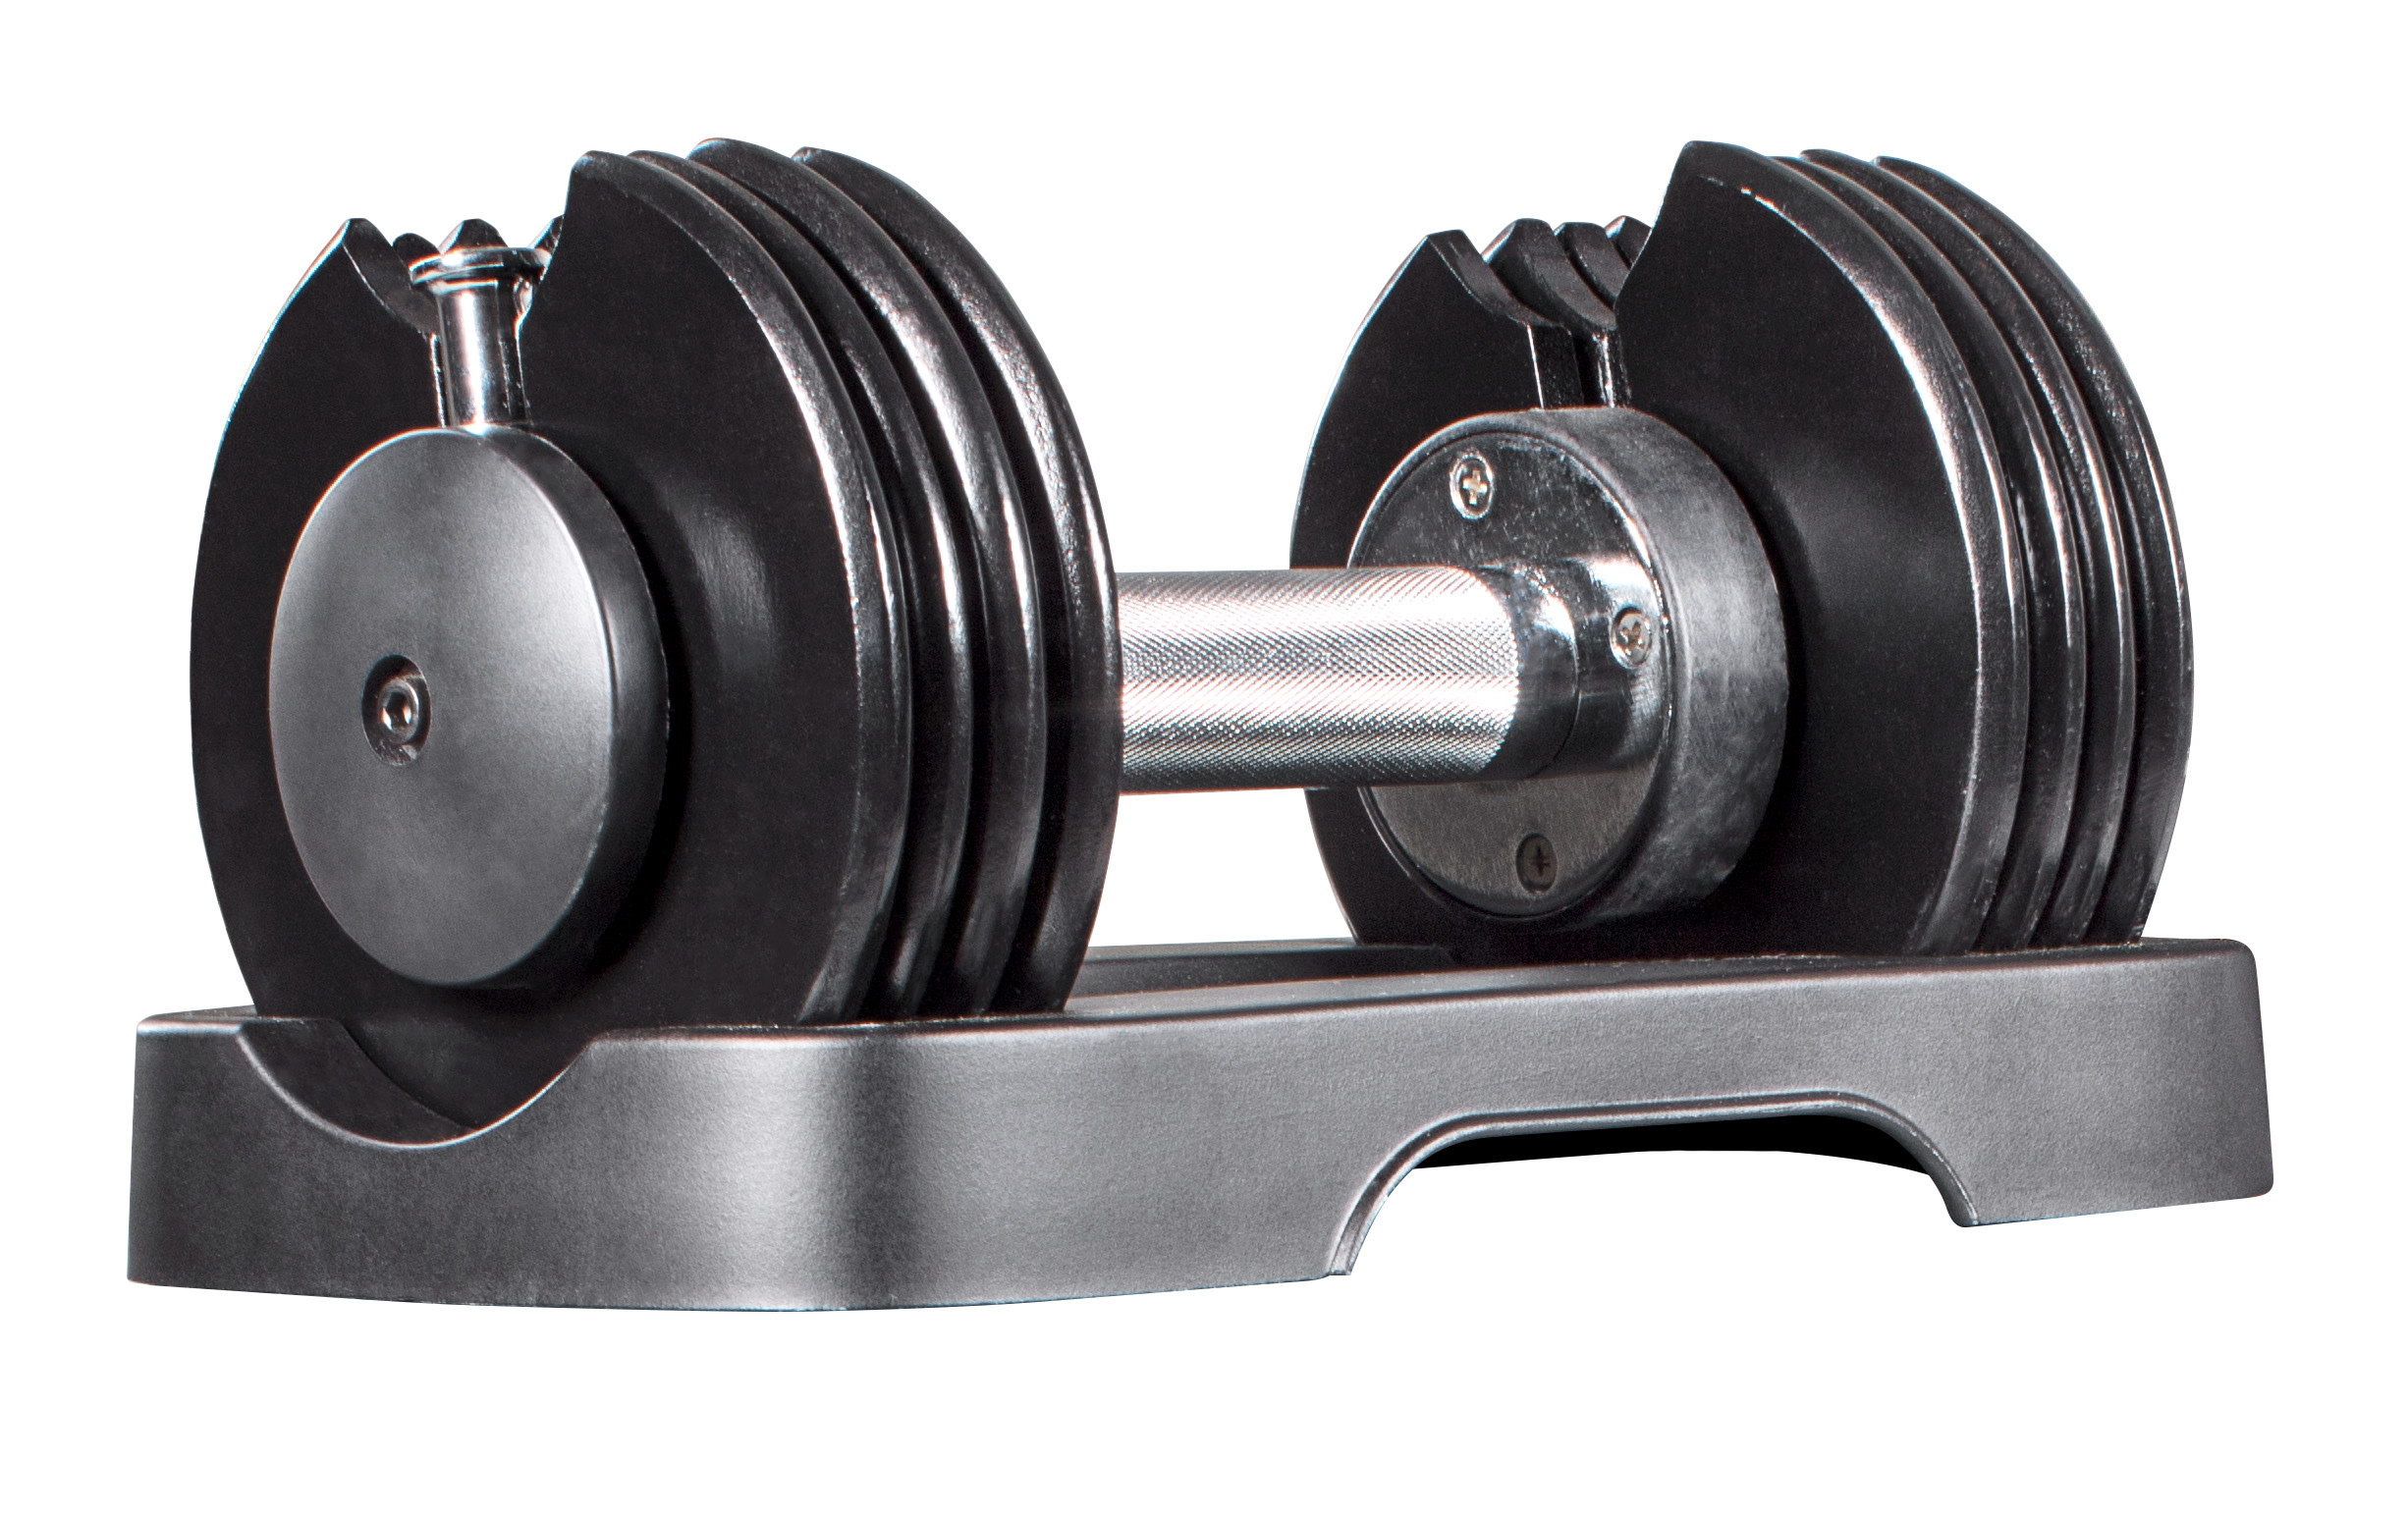 NordicTrack 12.5 lb. Adjustable Dumbbells with Weight Stands, Sold as Pair - image 5 of 10